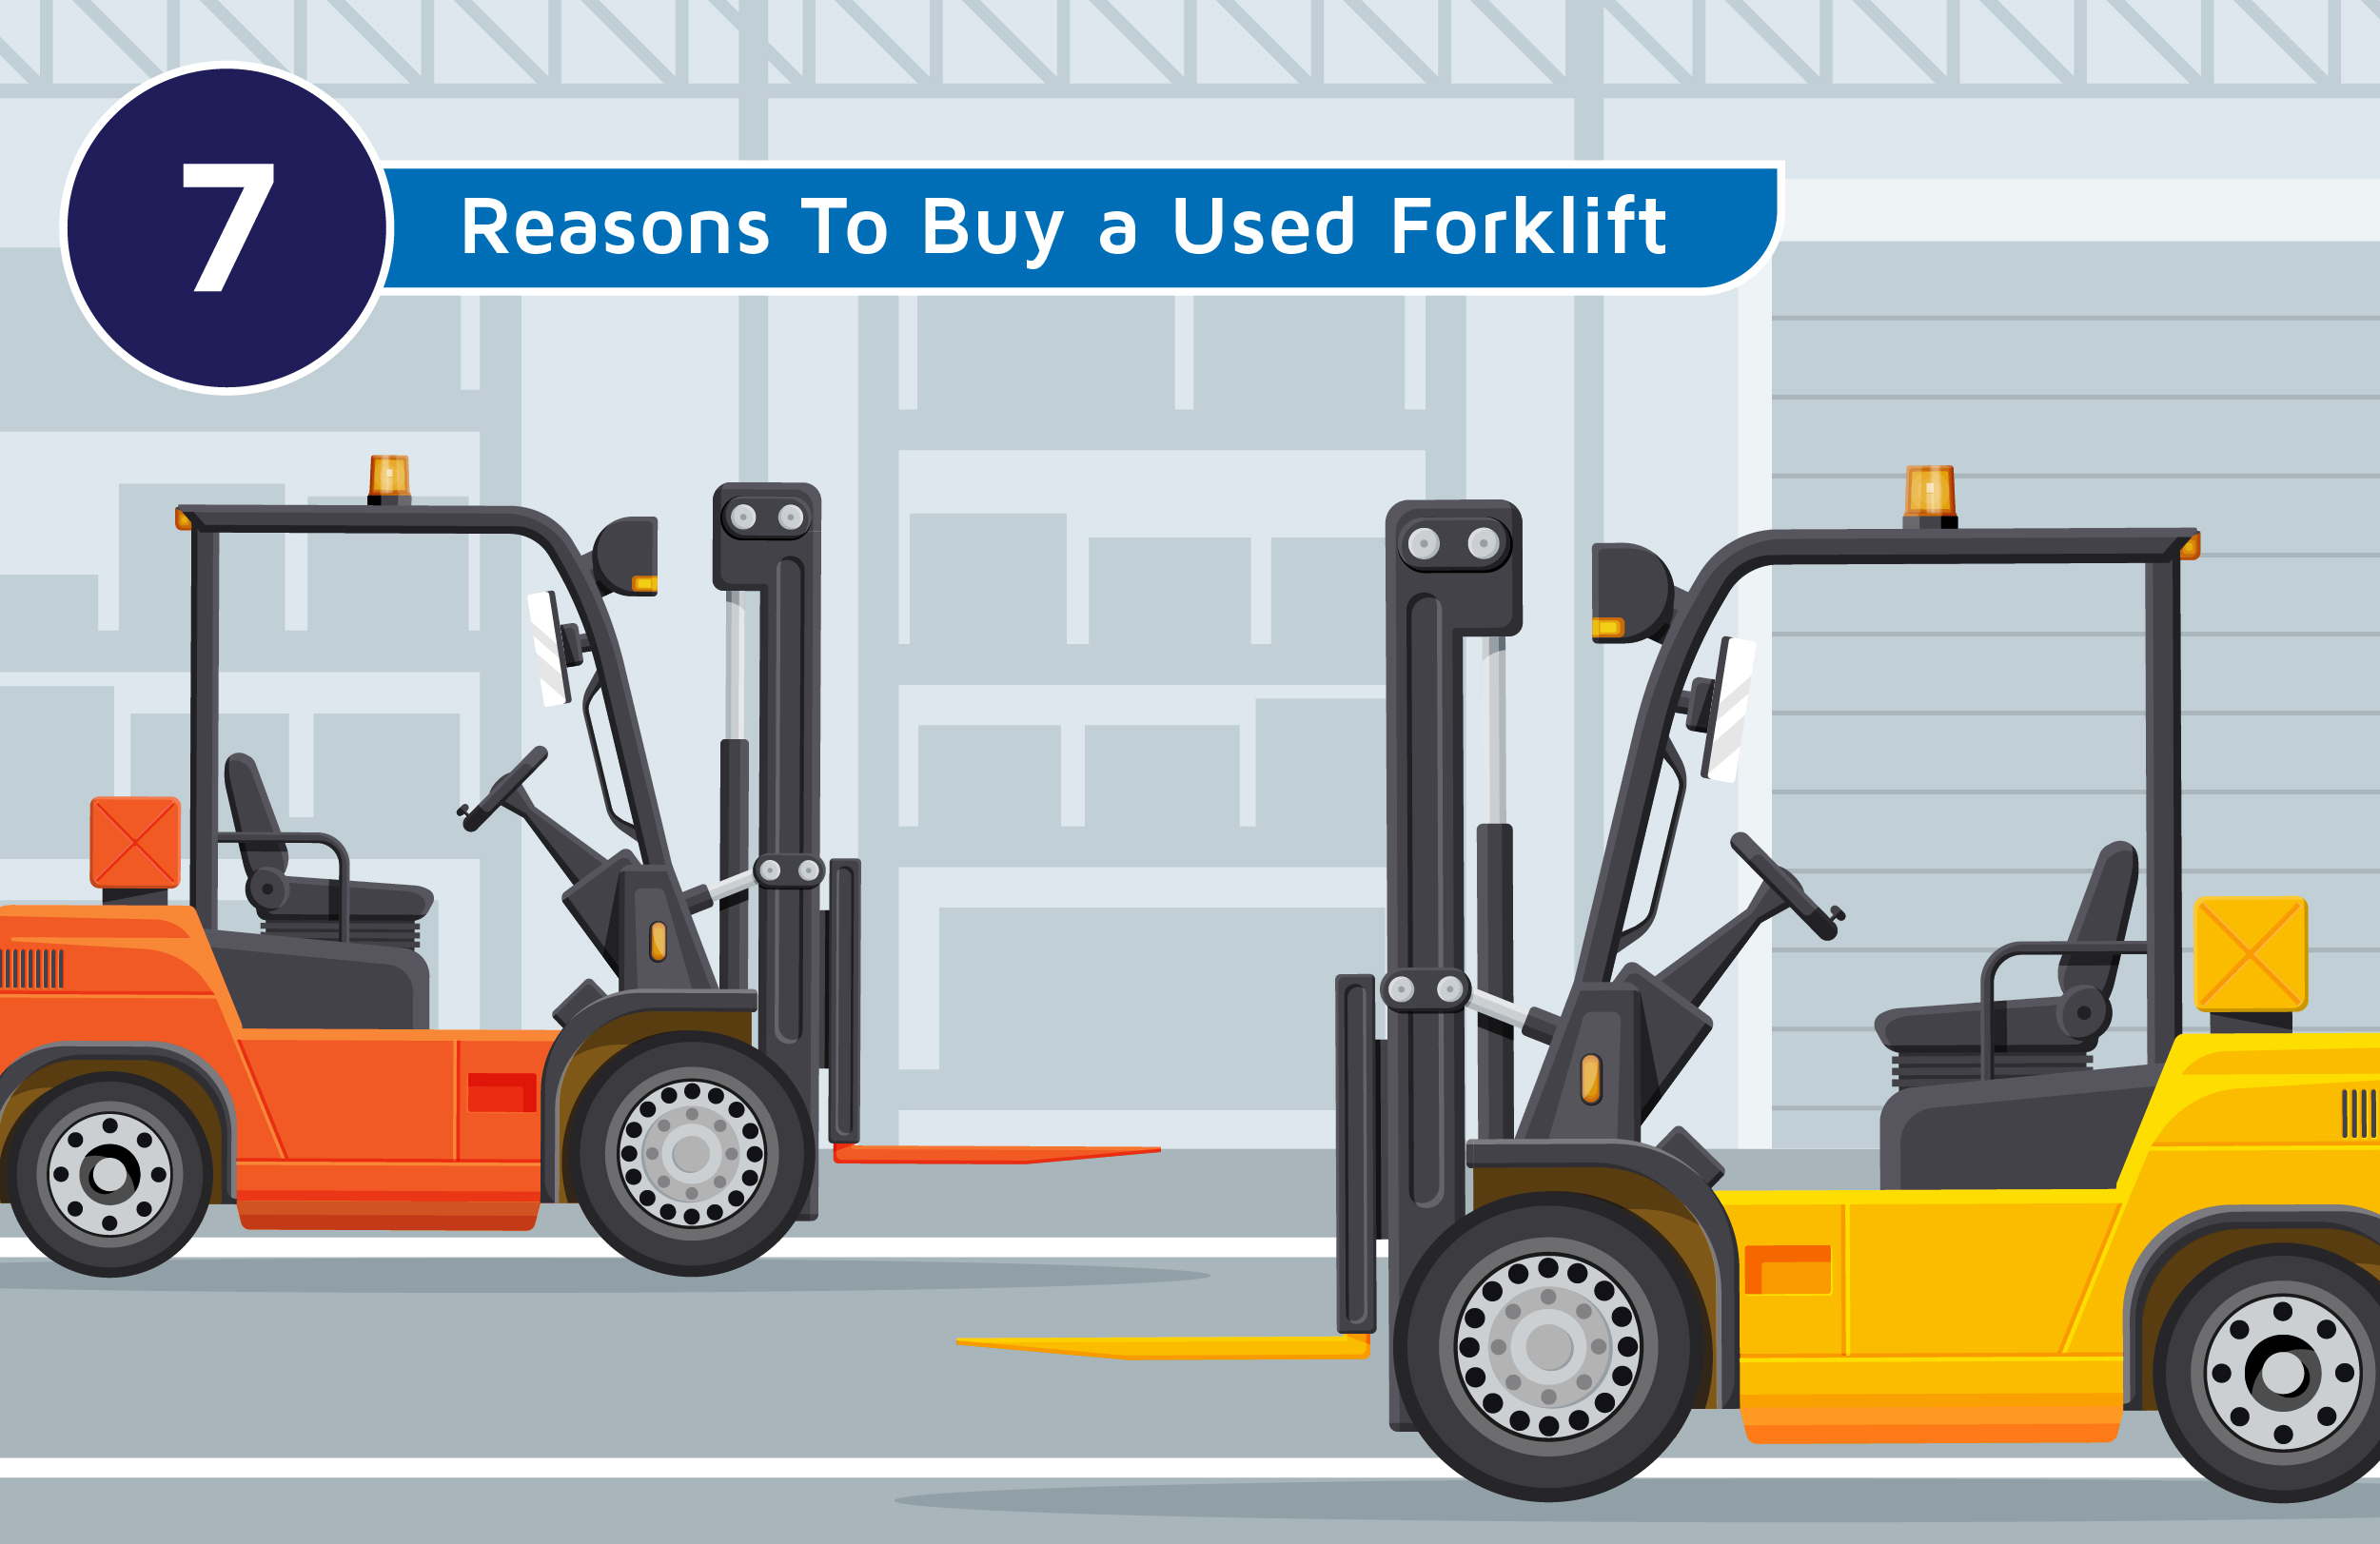 7 reasons to buy a used forklift